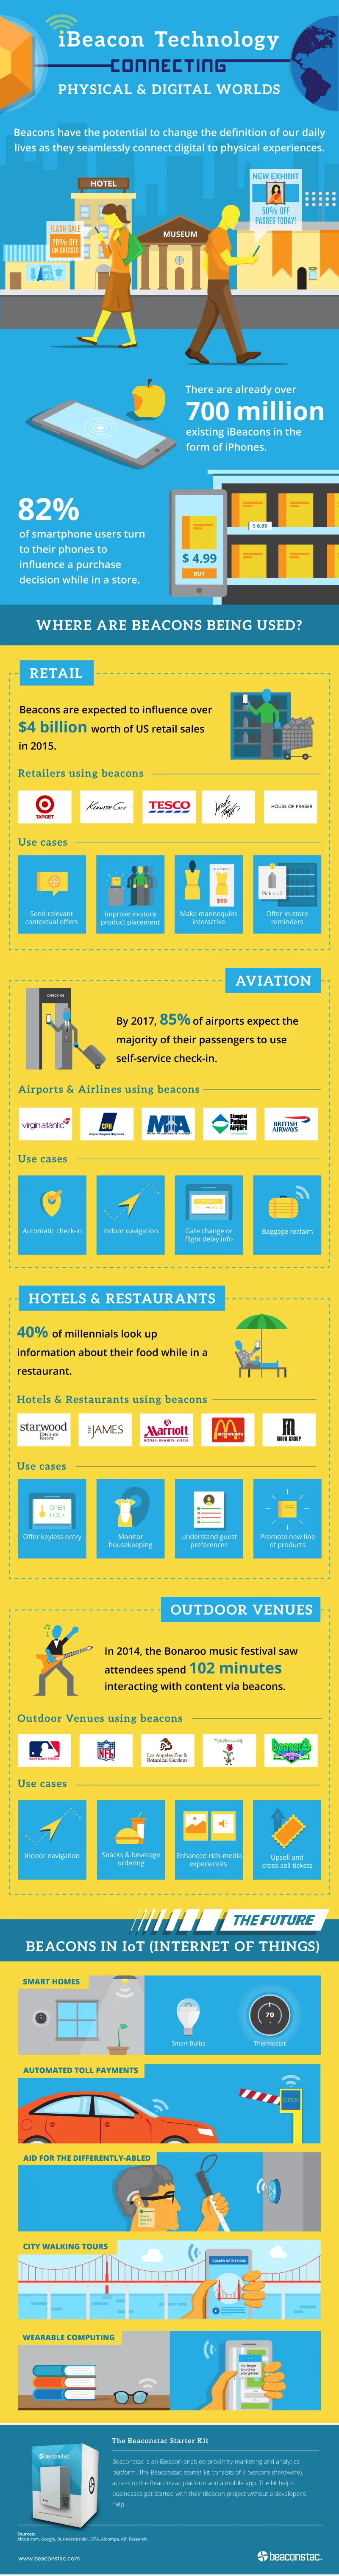 beaconstac_infographic_ibeacon_technology_connecting_physical_and_digital_world